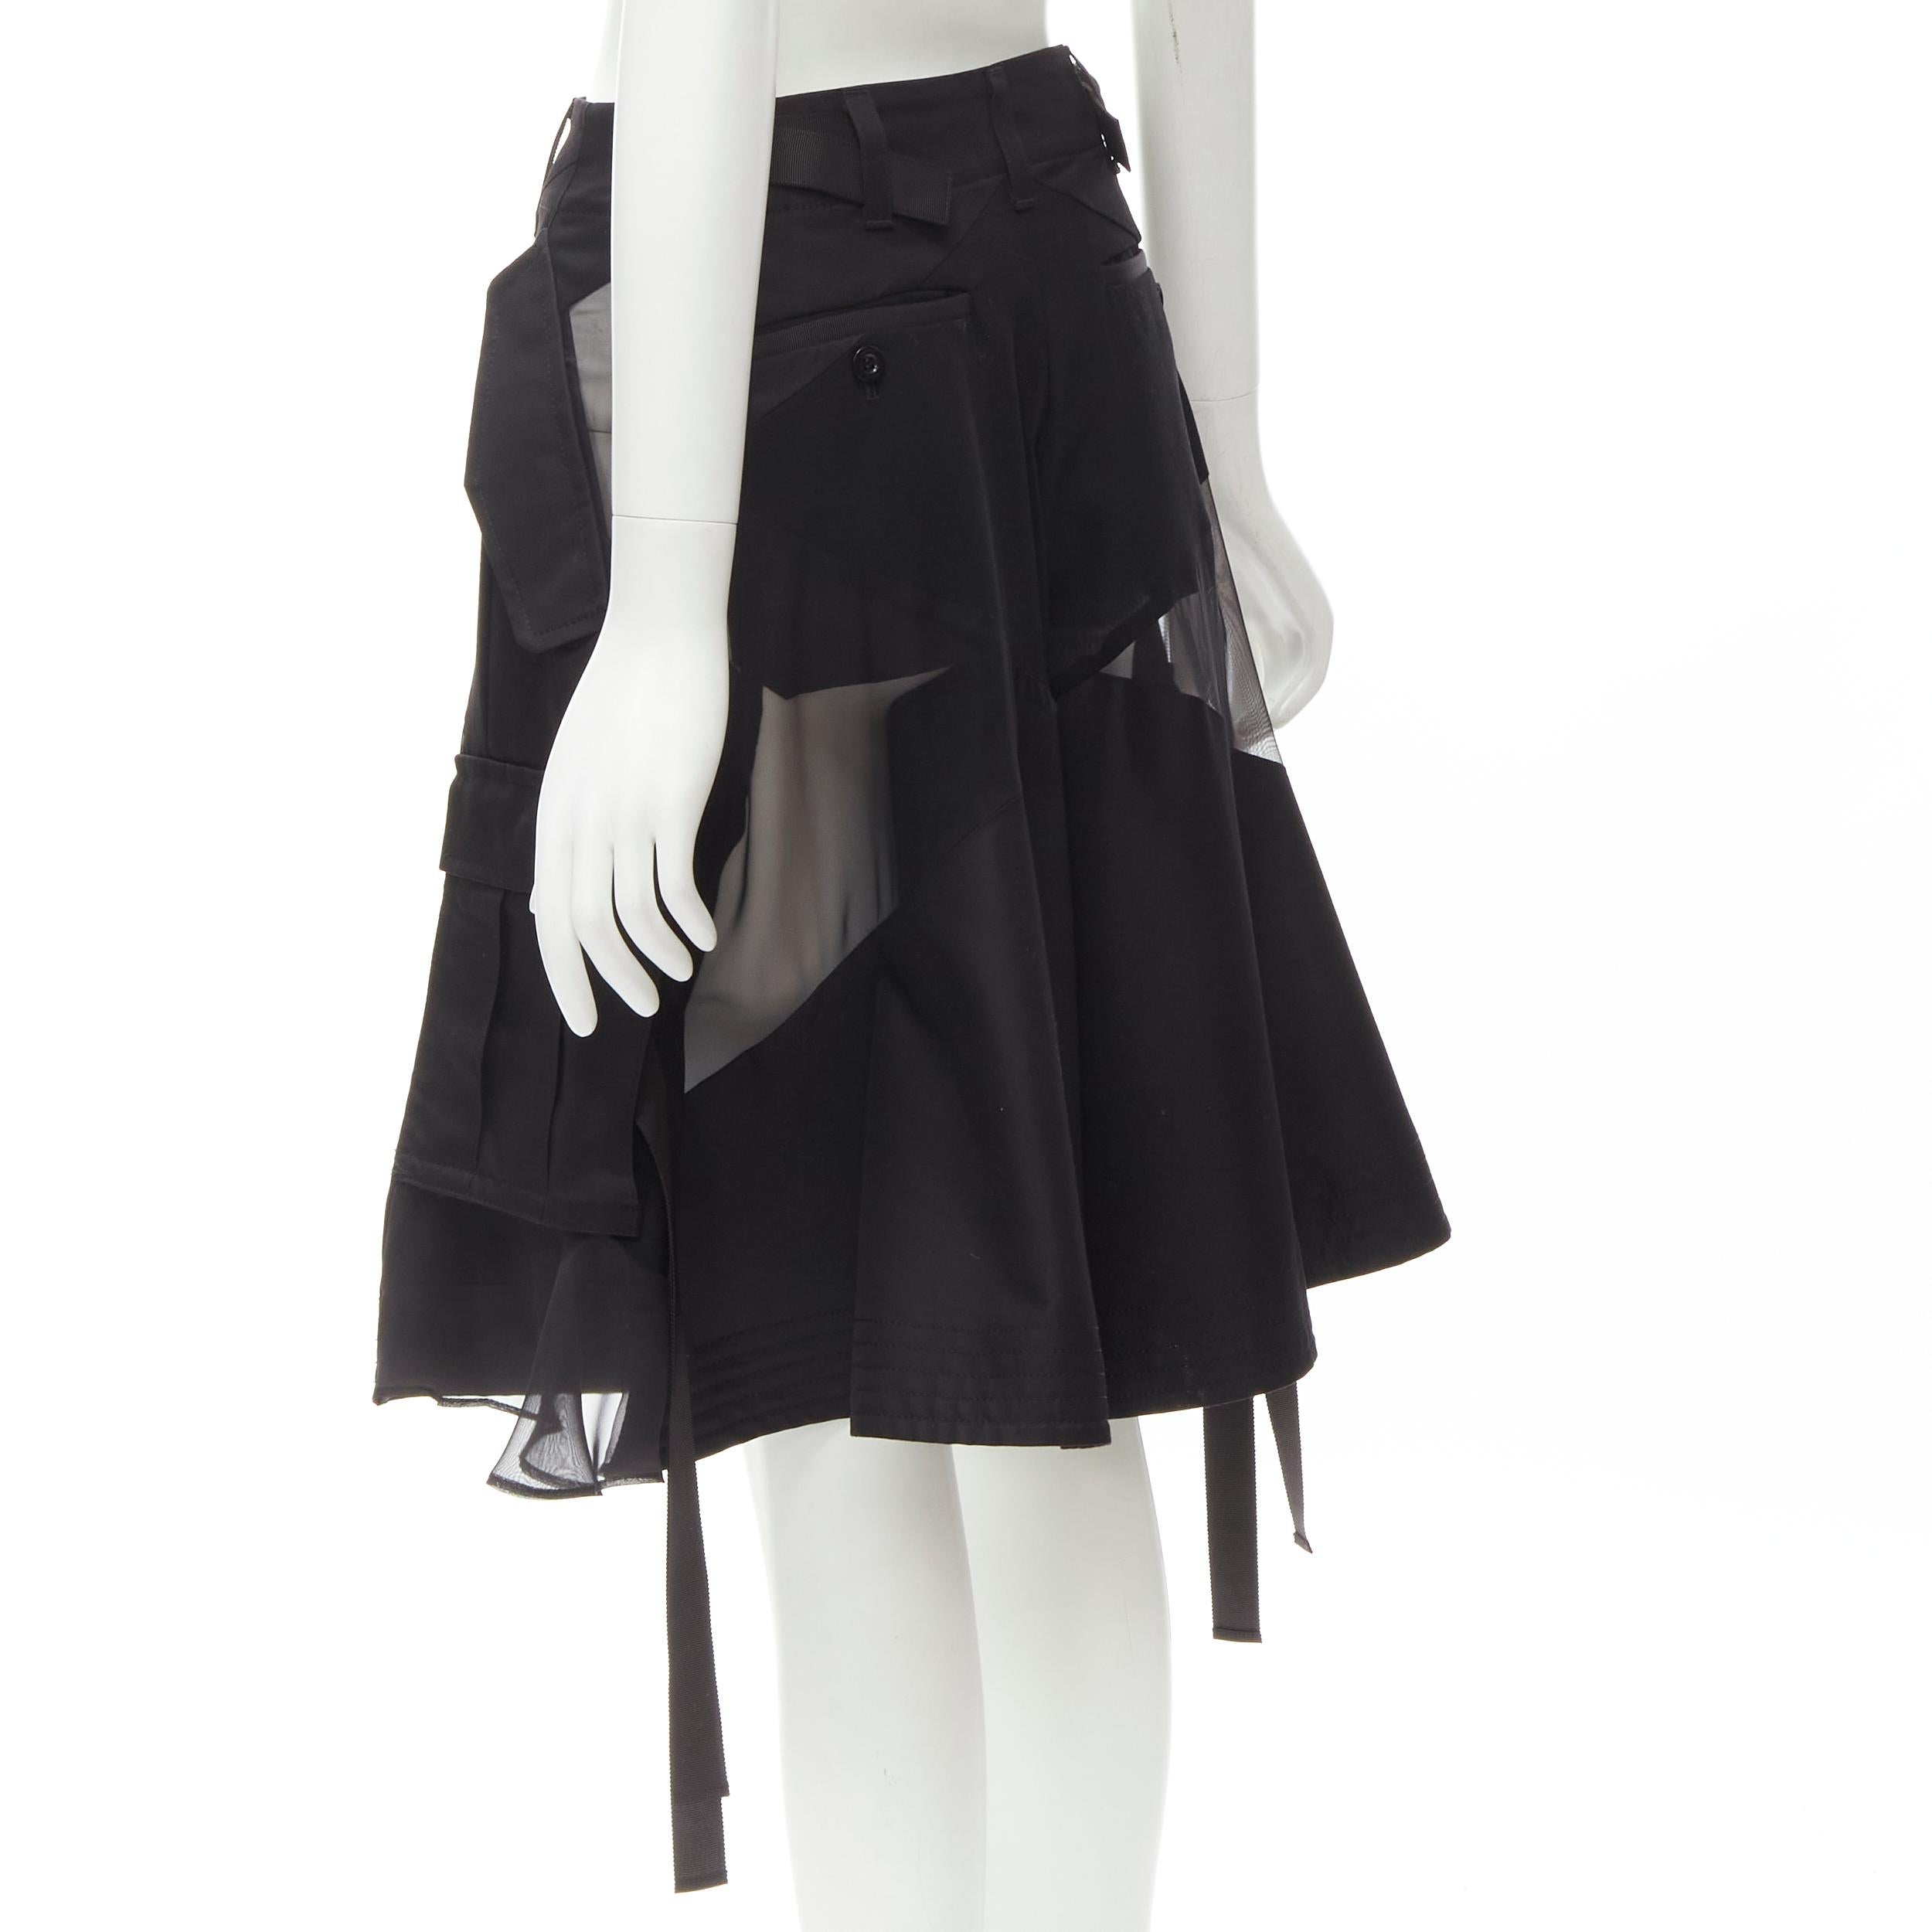 SACAI Chitose Abe black deconstructed sheer panel wide skirt flared shorts S 2